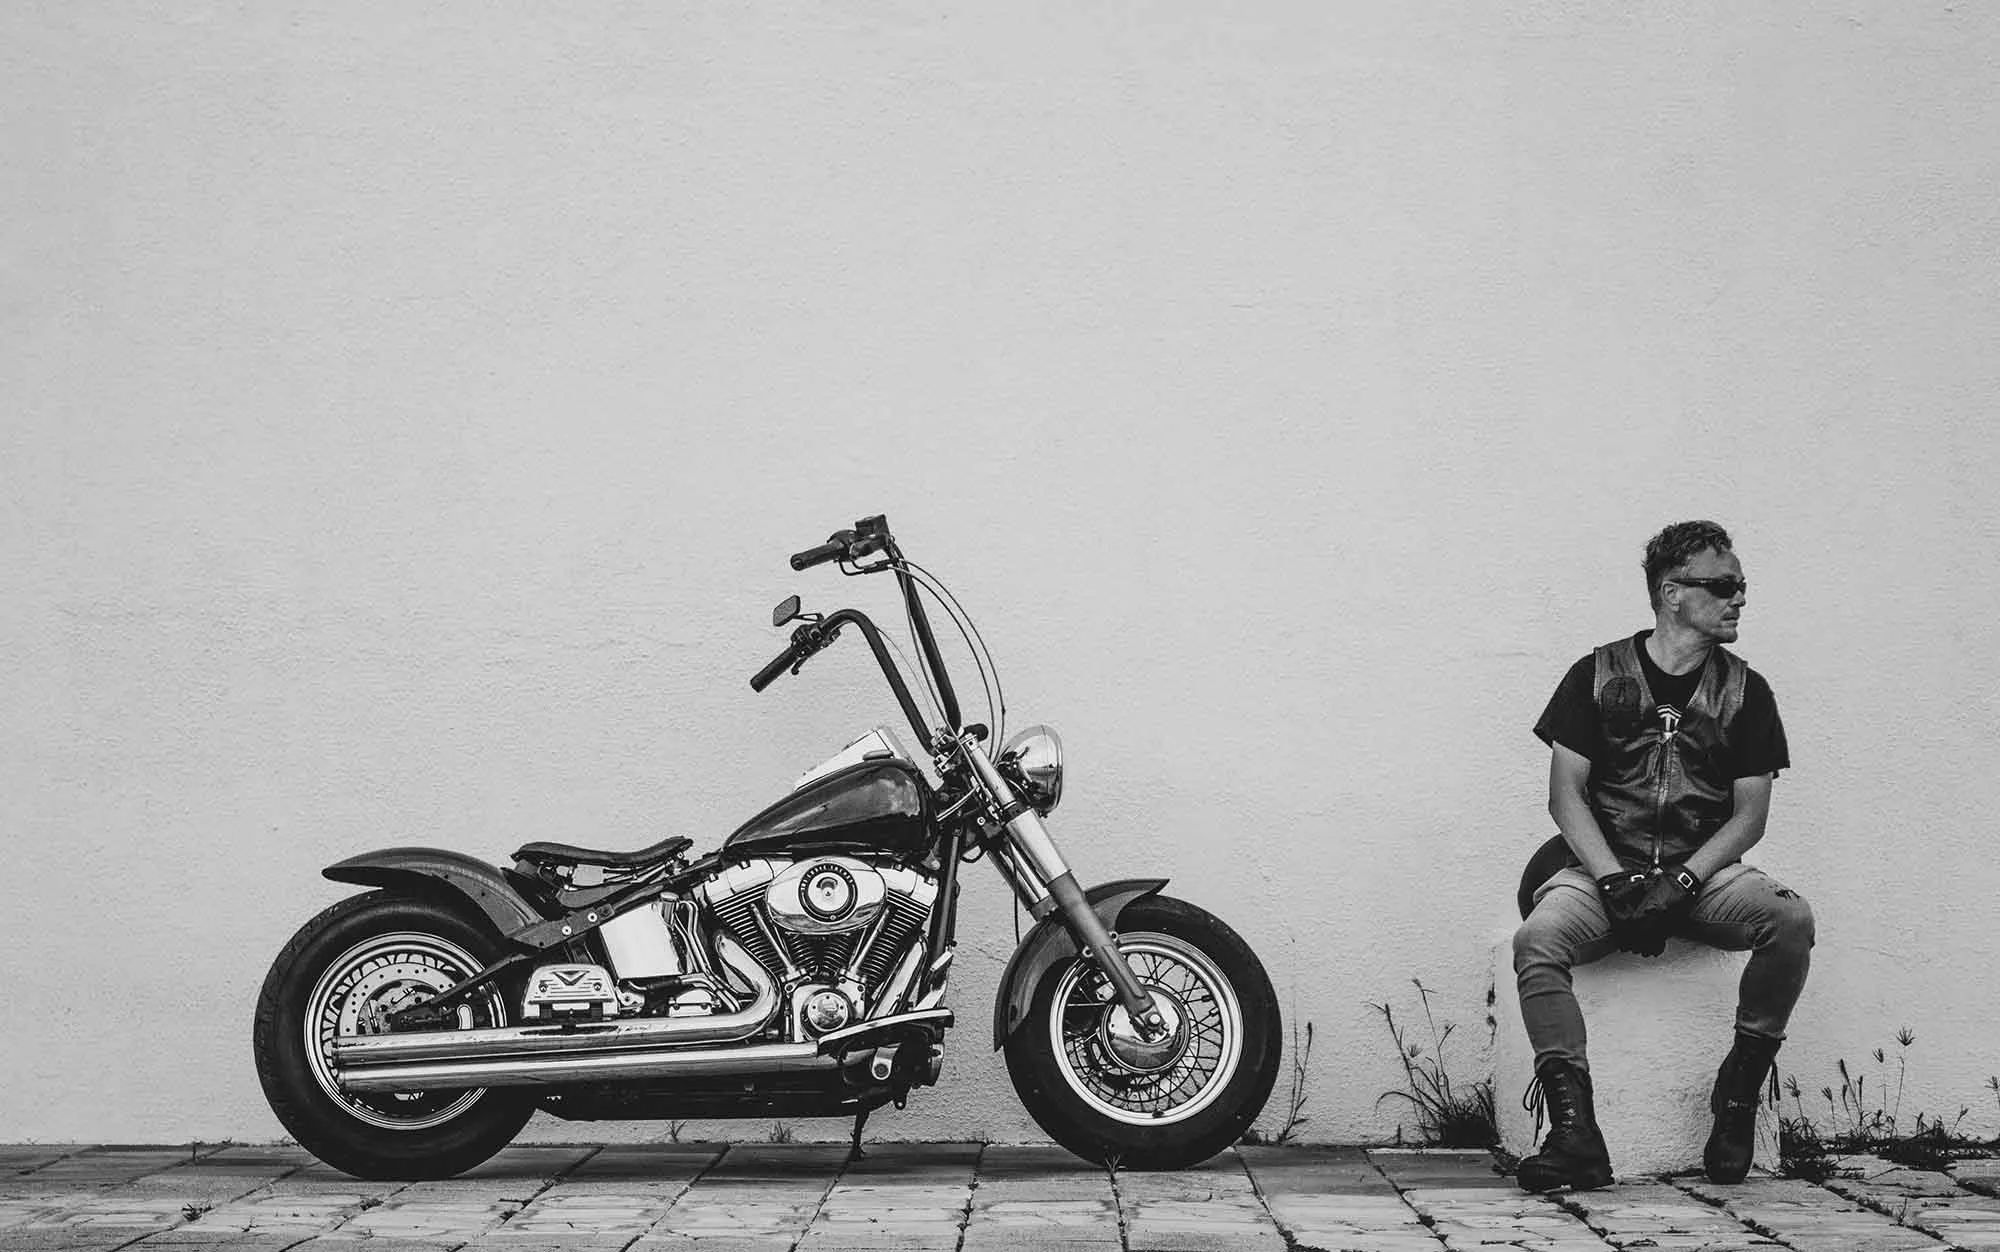 Motorcyclist and his bike